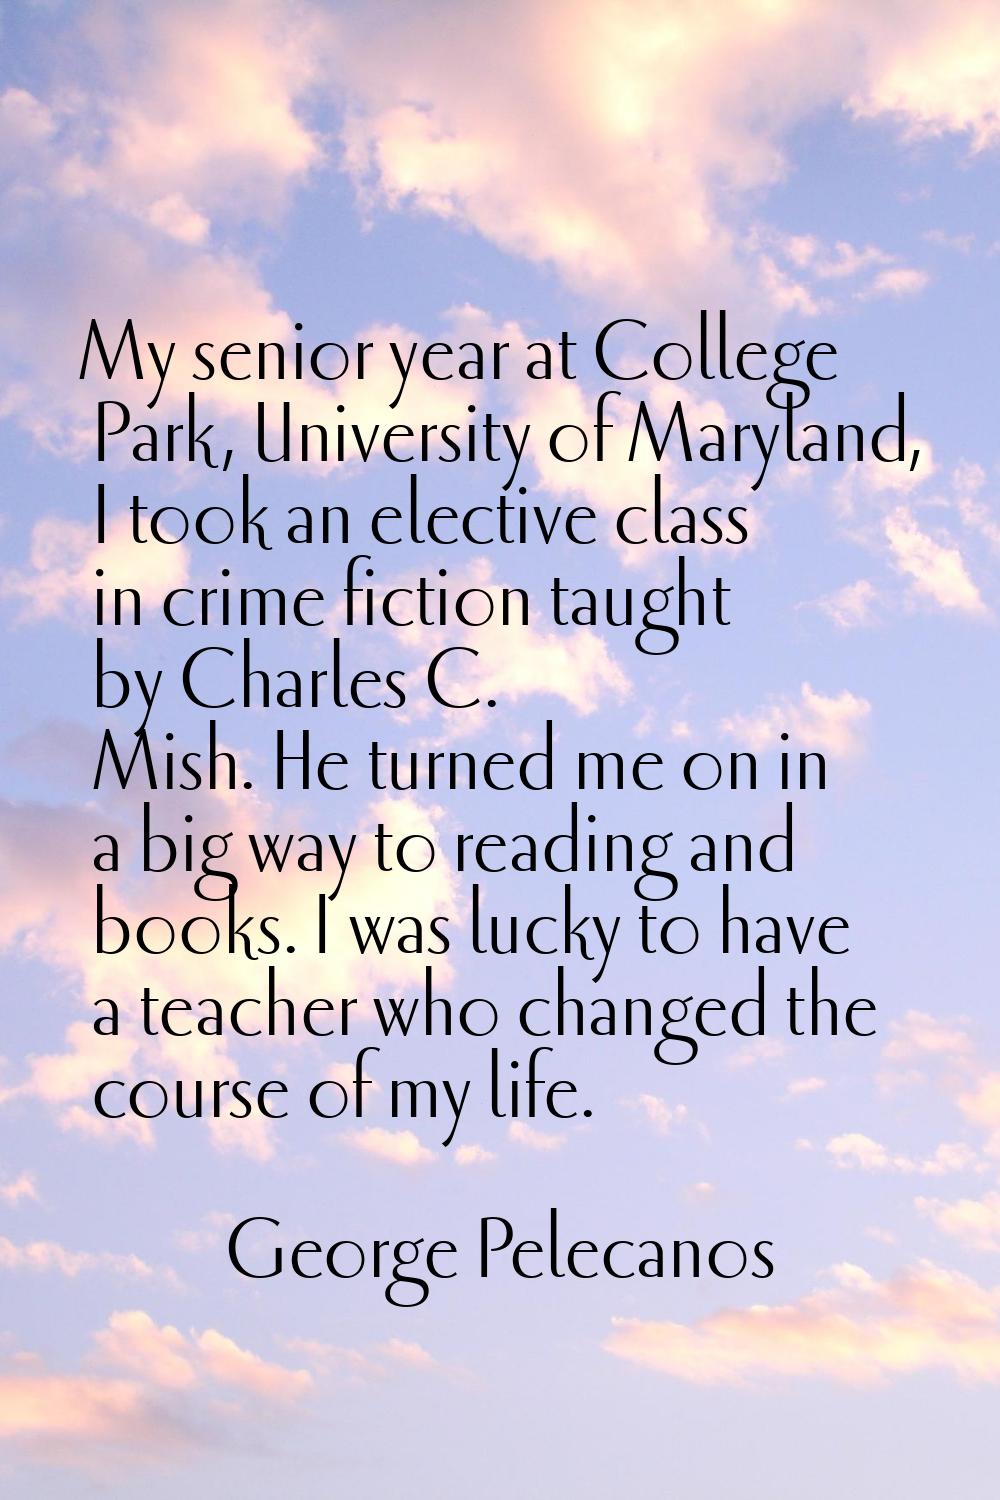 My senior year at College Park, University of Maryland, I took an elective class in crime fiction t